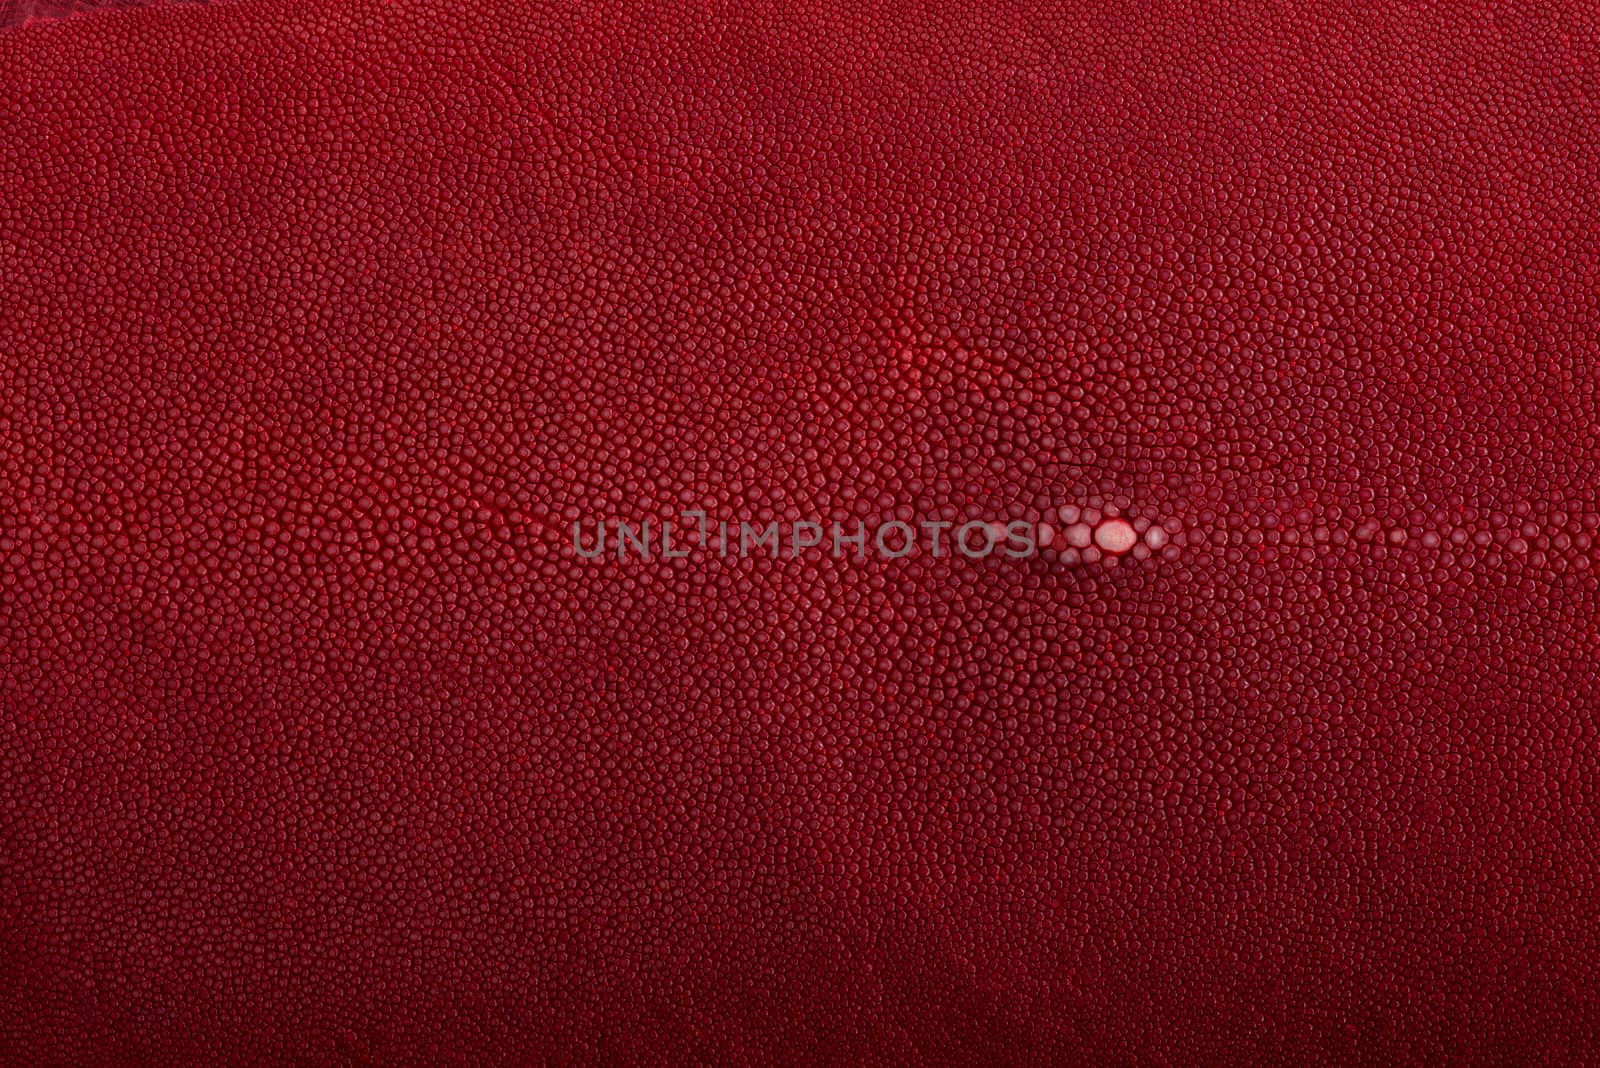 Stingray exotic fish leather, red color skin